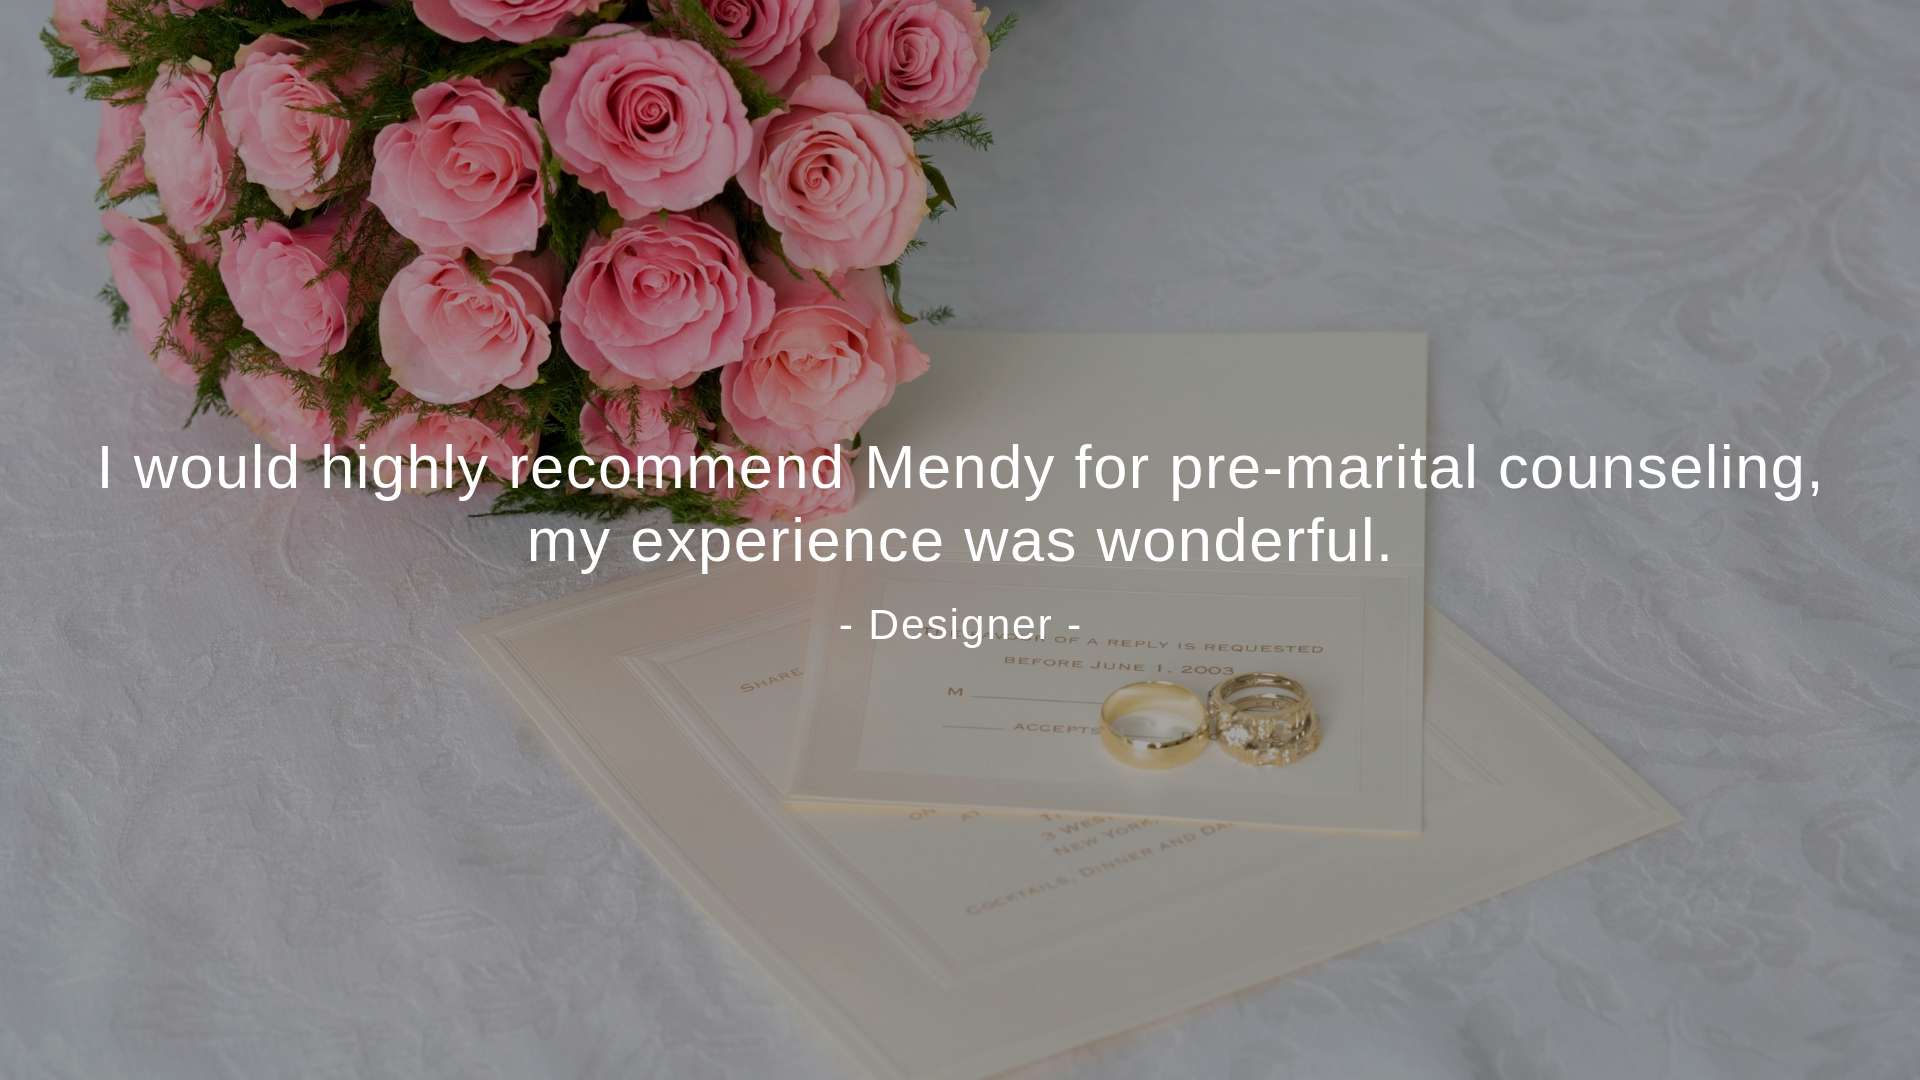 "I would highly recommend Mendy for pre-marital counseling, my experience was wonderful," A designer said.